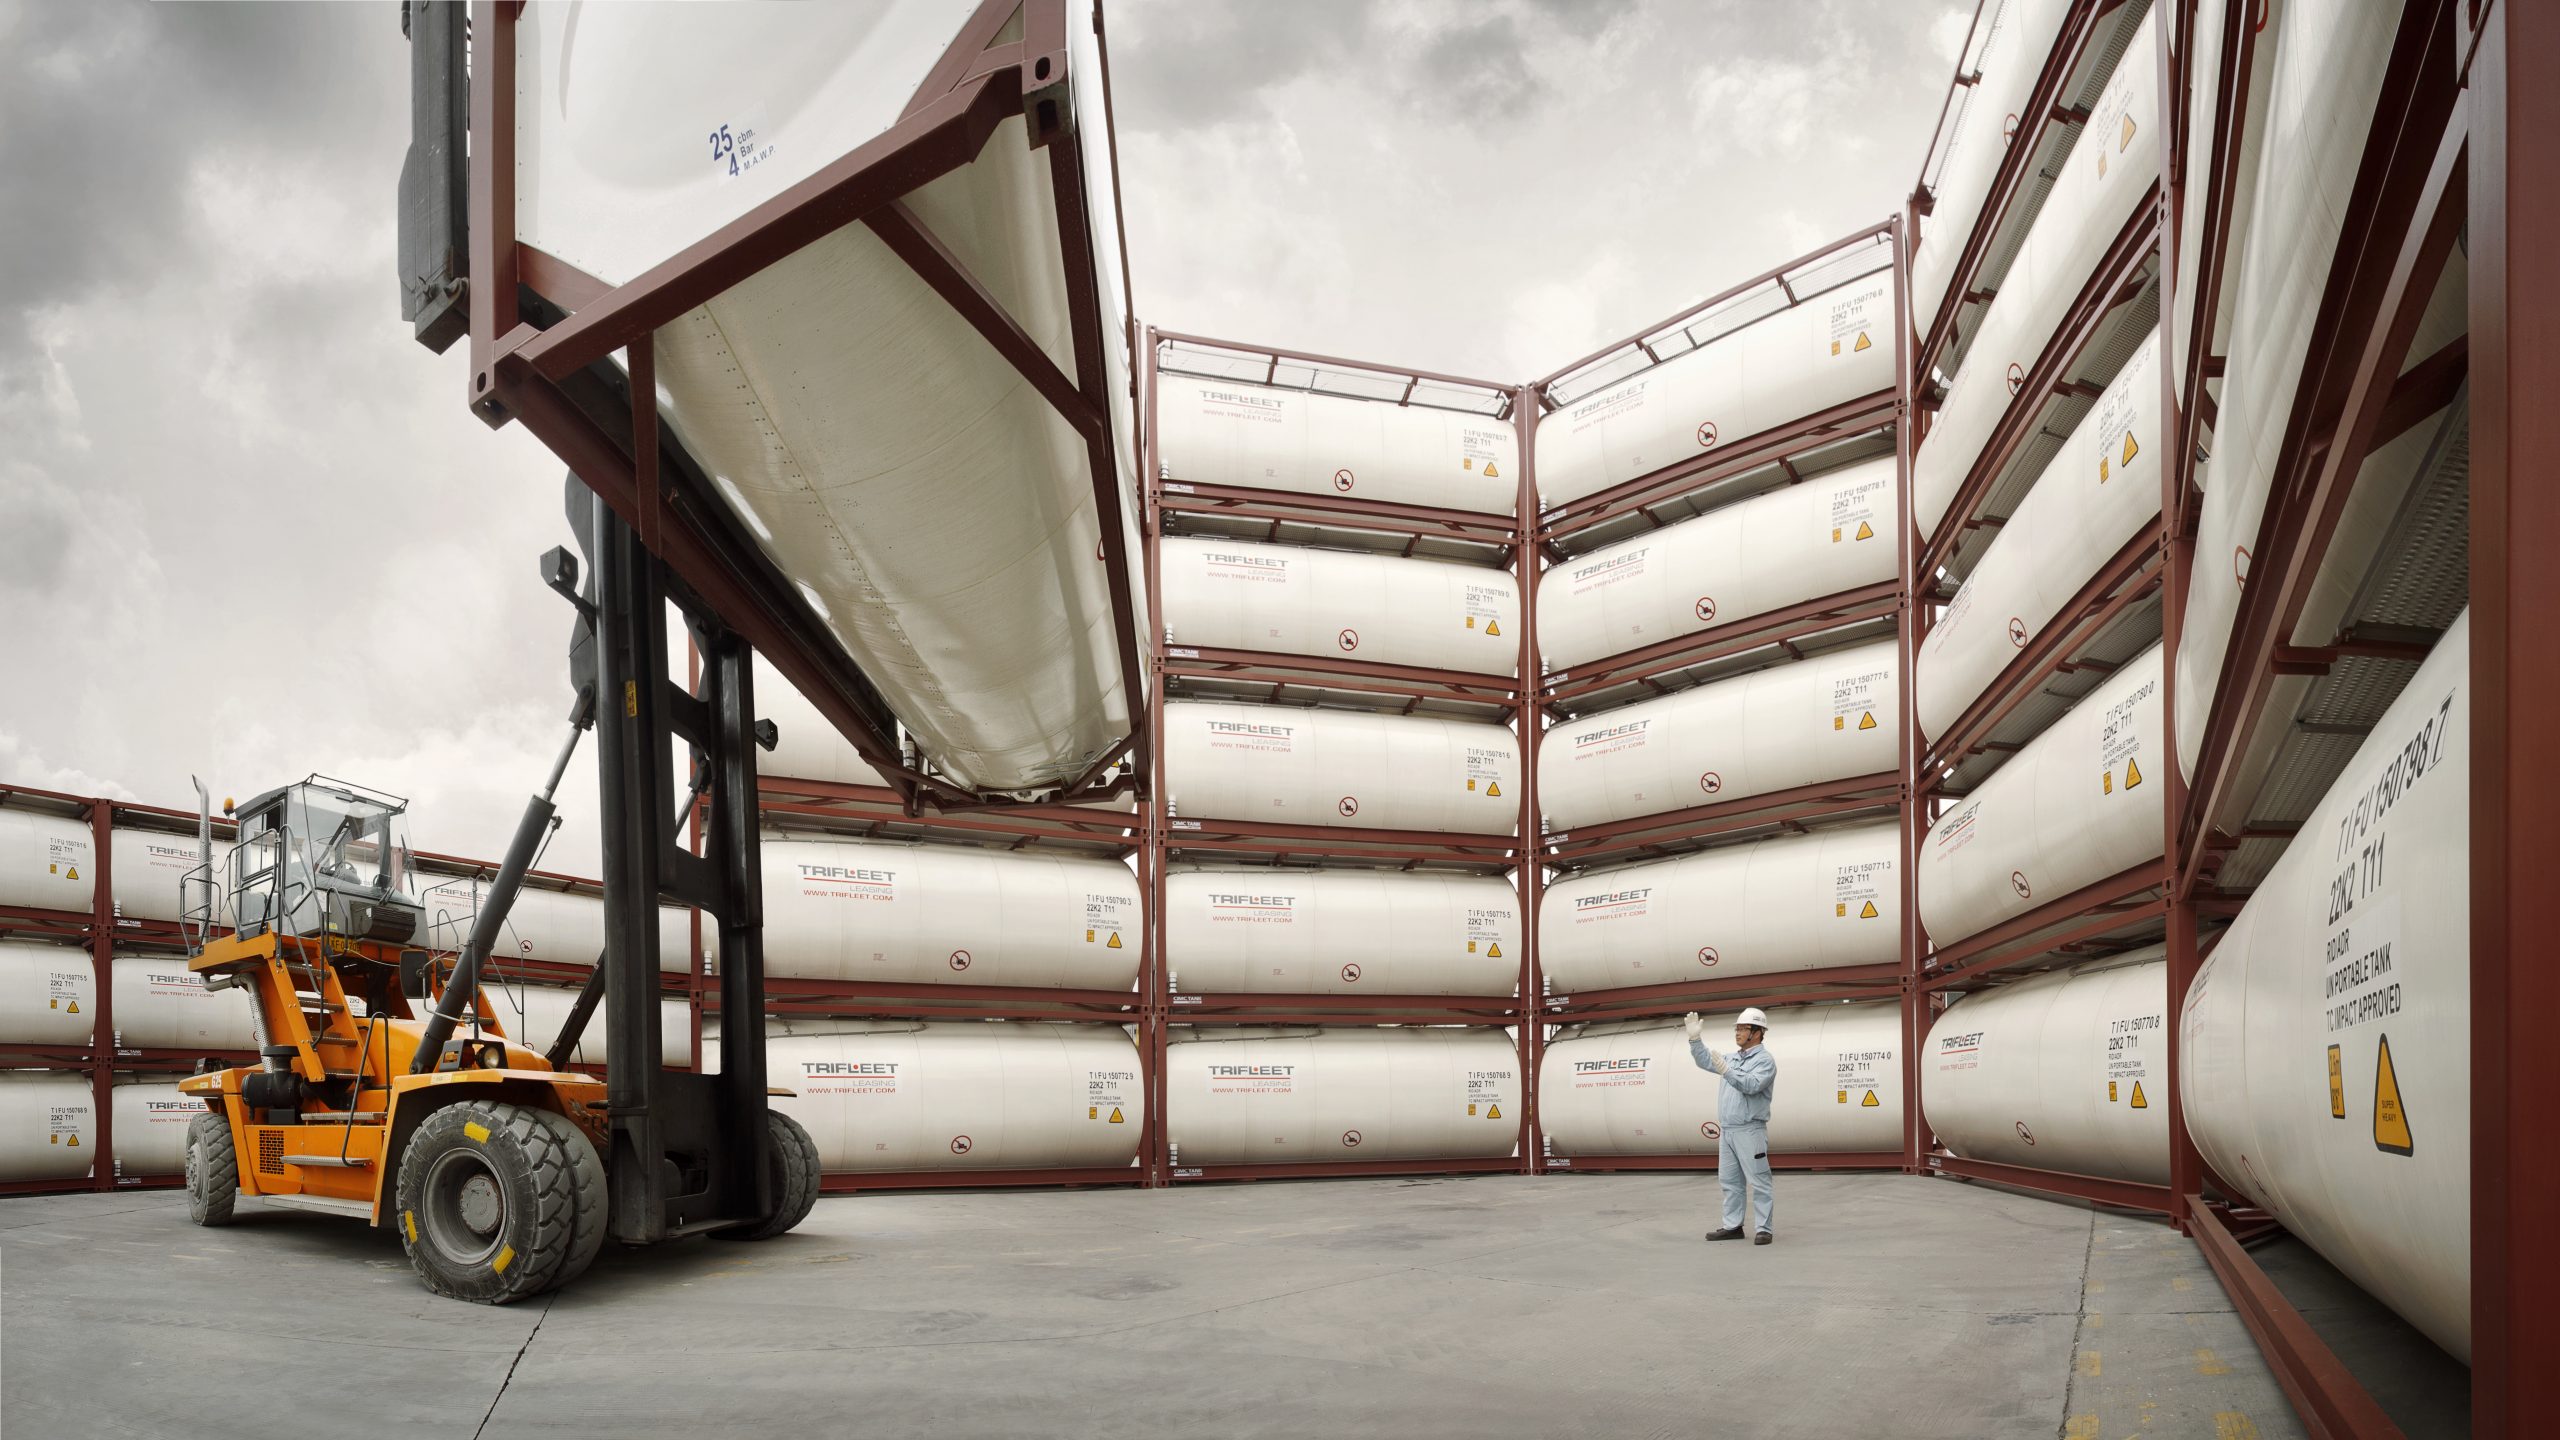 Tank containers being stacked in half circle, industrial photography in China. Photographer Tuomas Harjumaaskola.